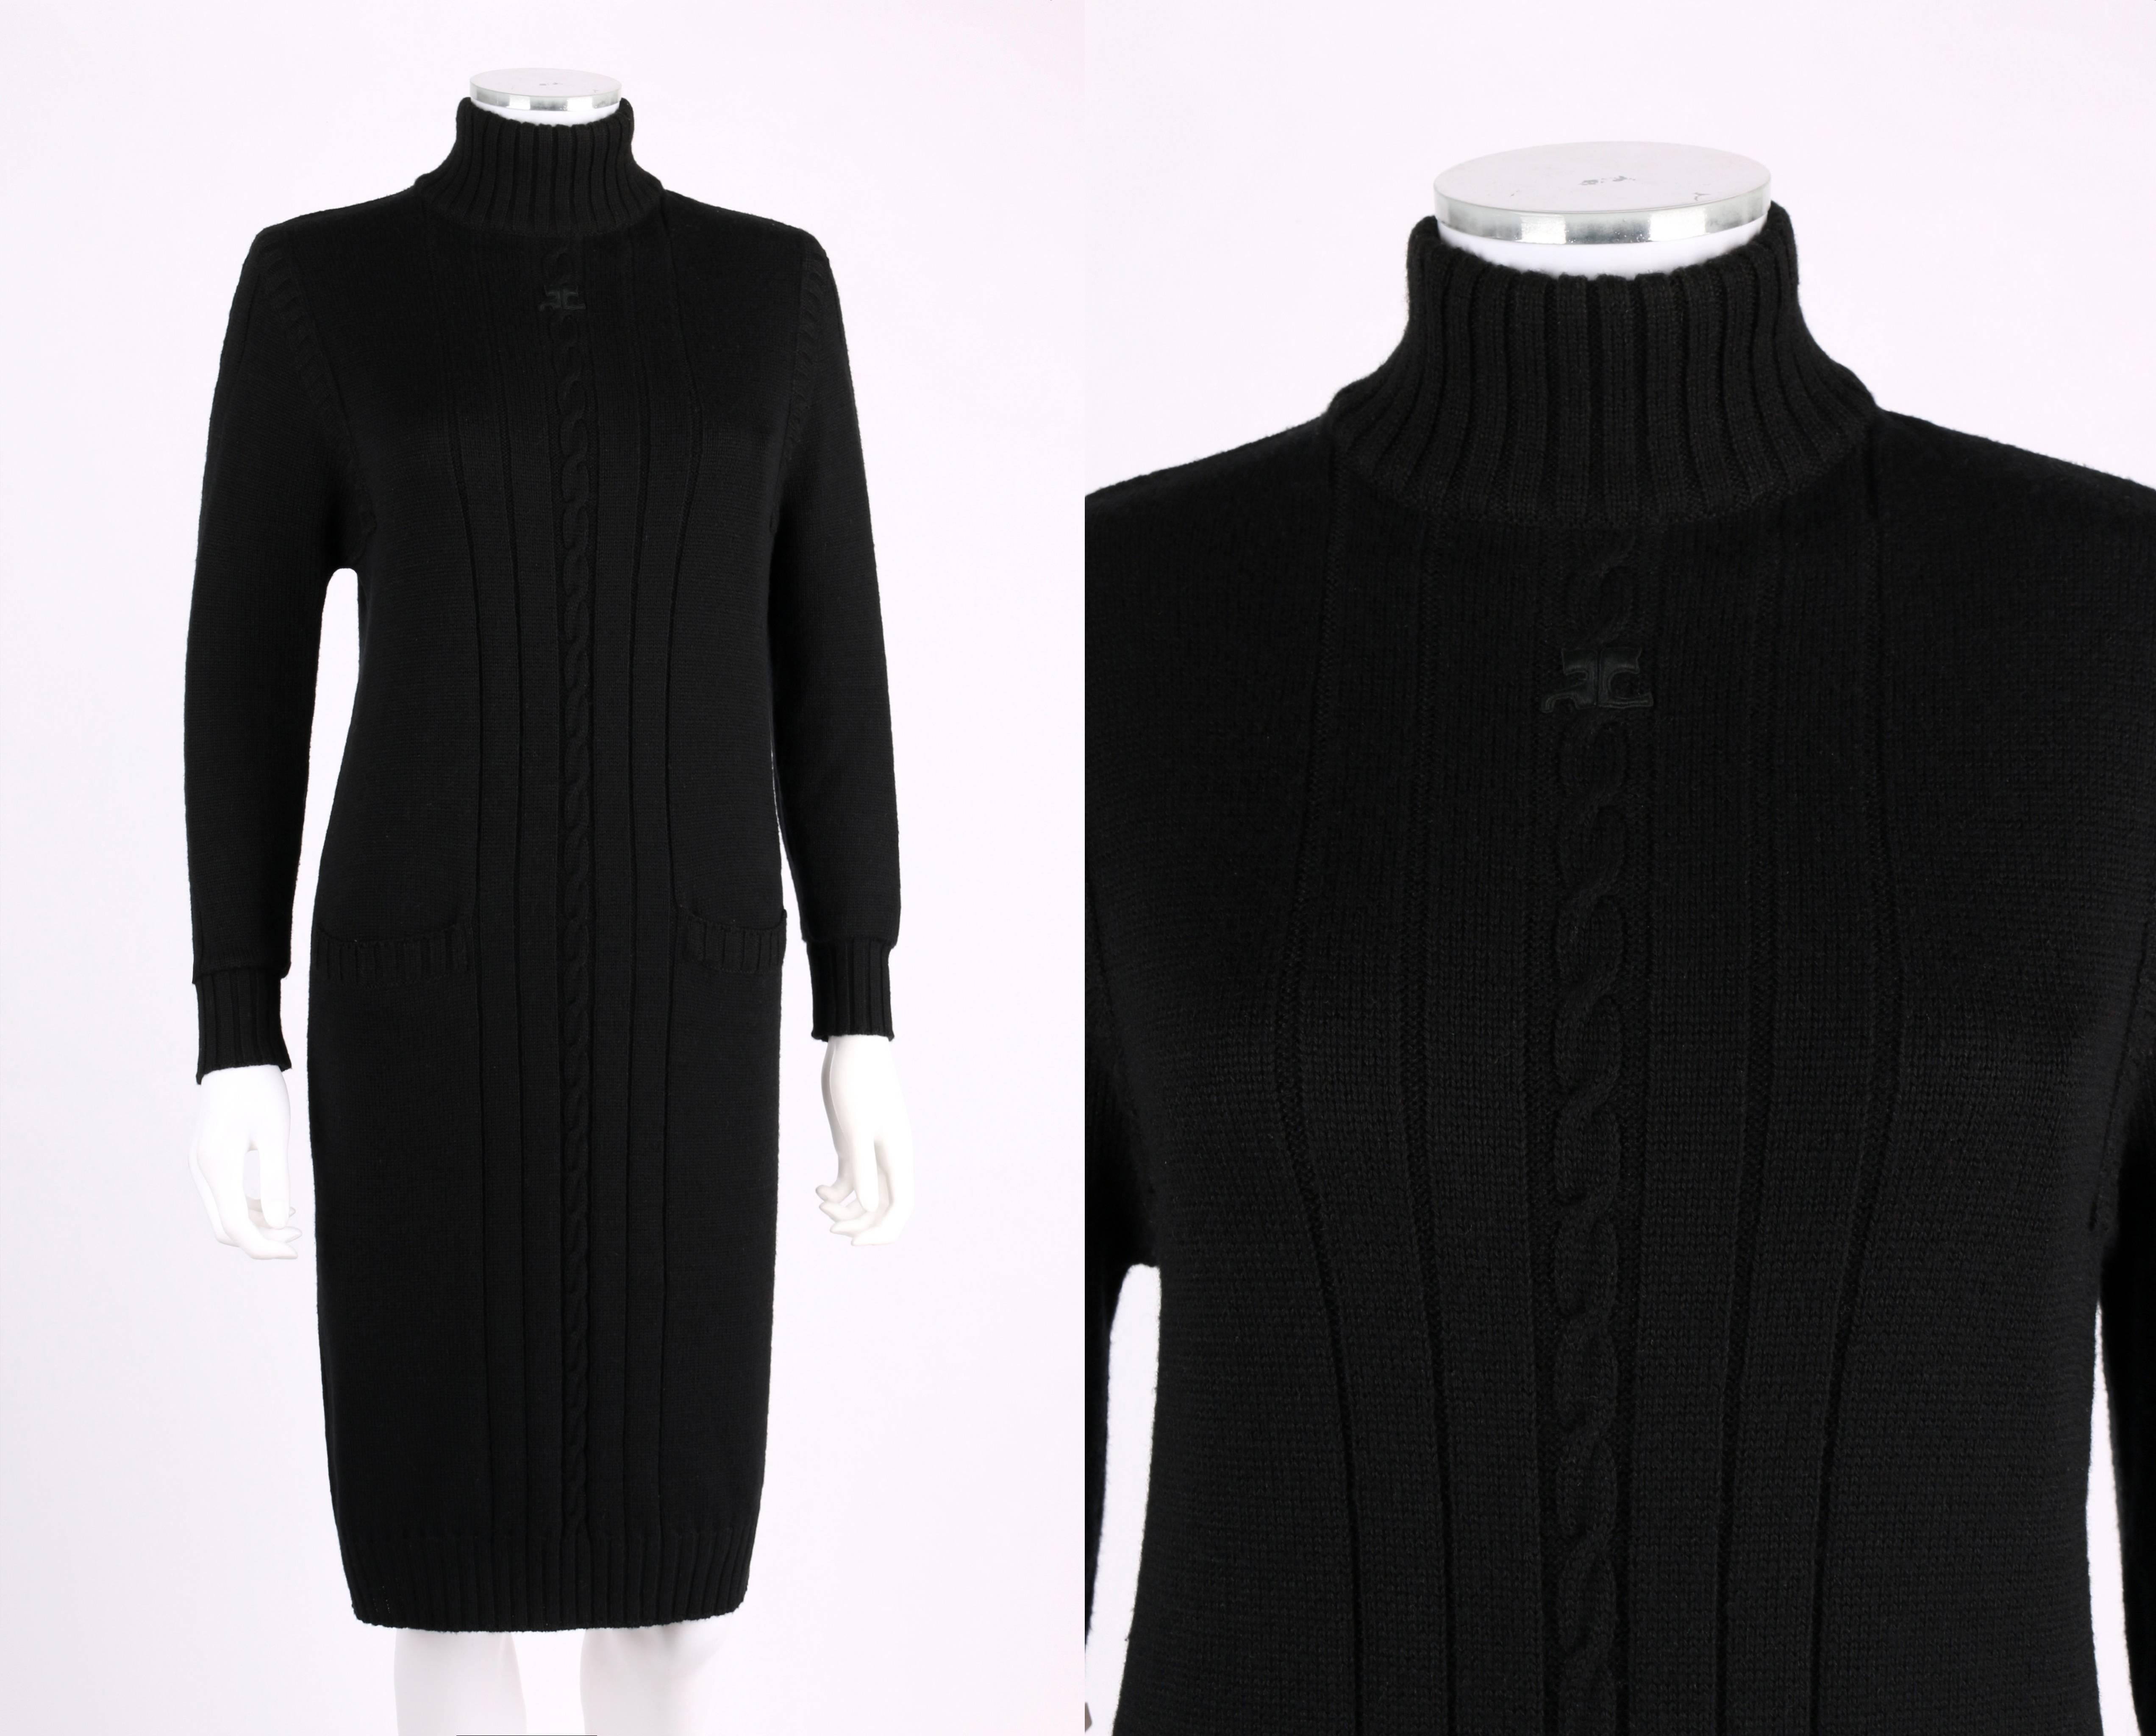 Vintage Courreges c.1980's black wool cable knit mock neck sweater dress. Designed by Andre Courreges. Mock neck rib knit collar. Long sleeves. Large cable and rib knit detail from collar to hem at center front, center back, and along top of